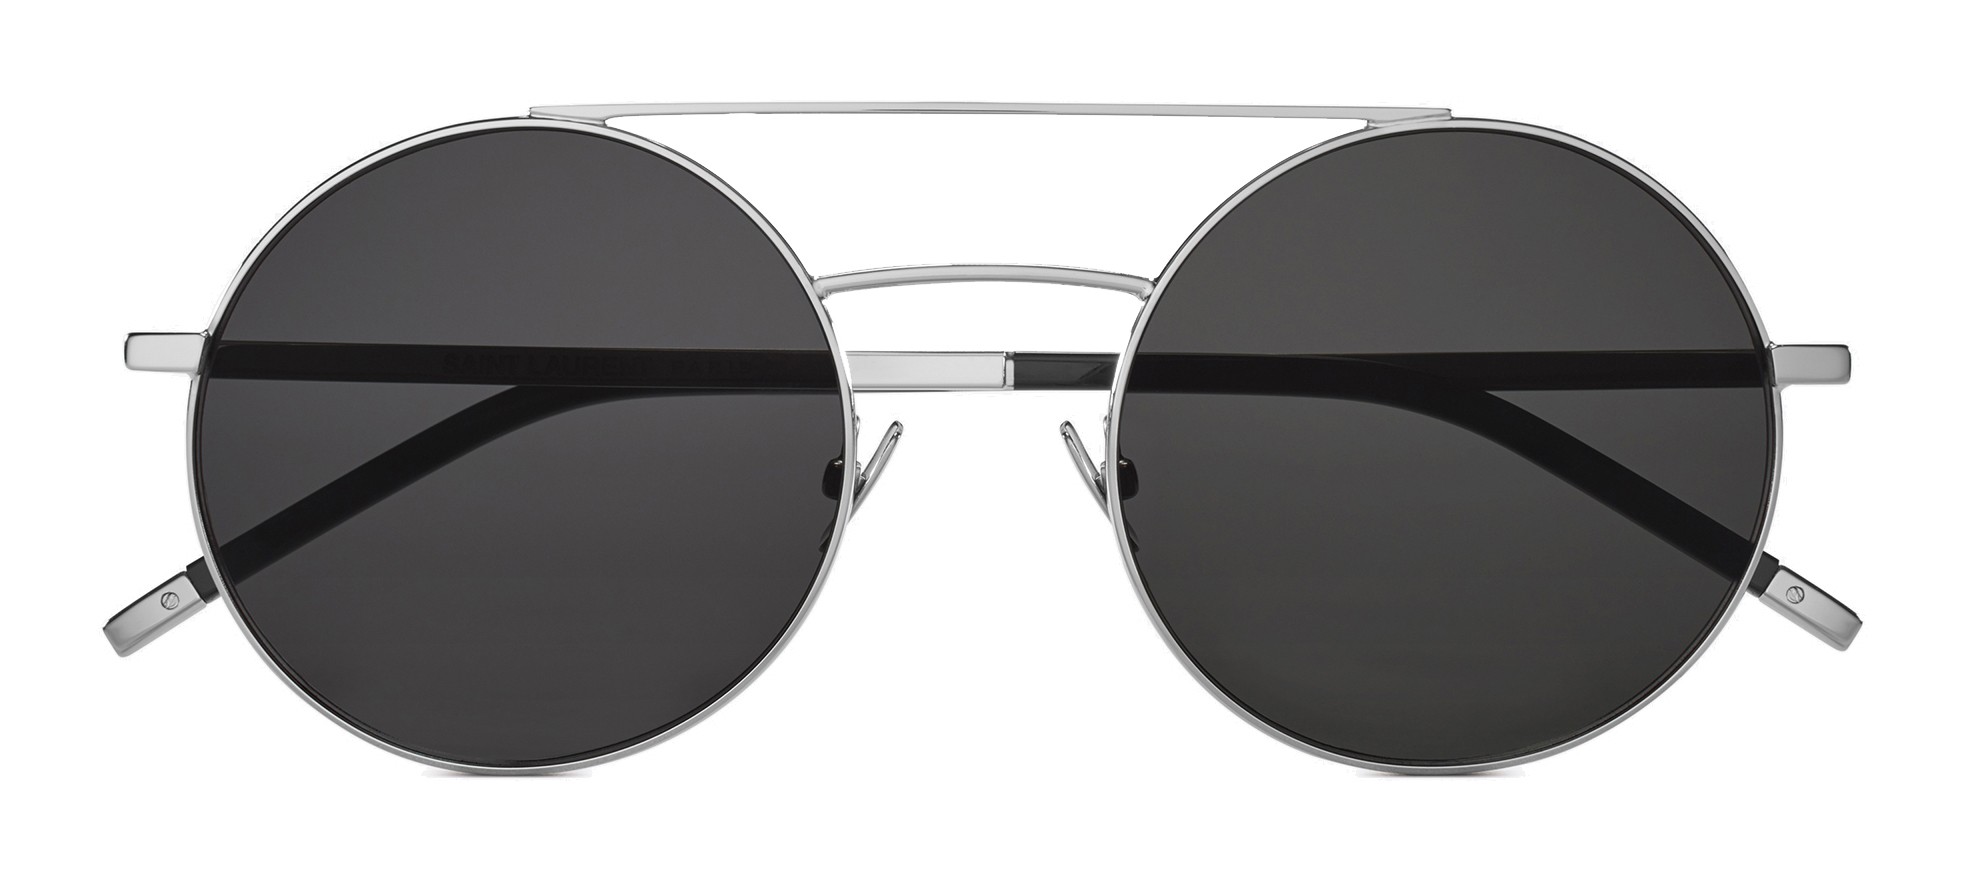 Yves Saint Laurent - Classic SL 210 Round Sunglasses with Double 